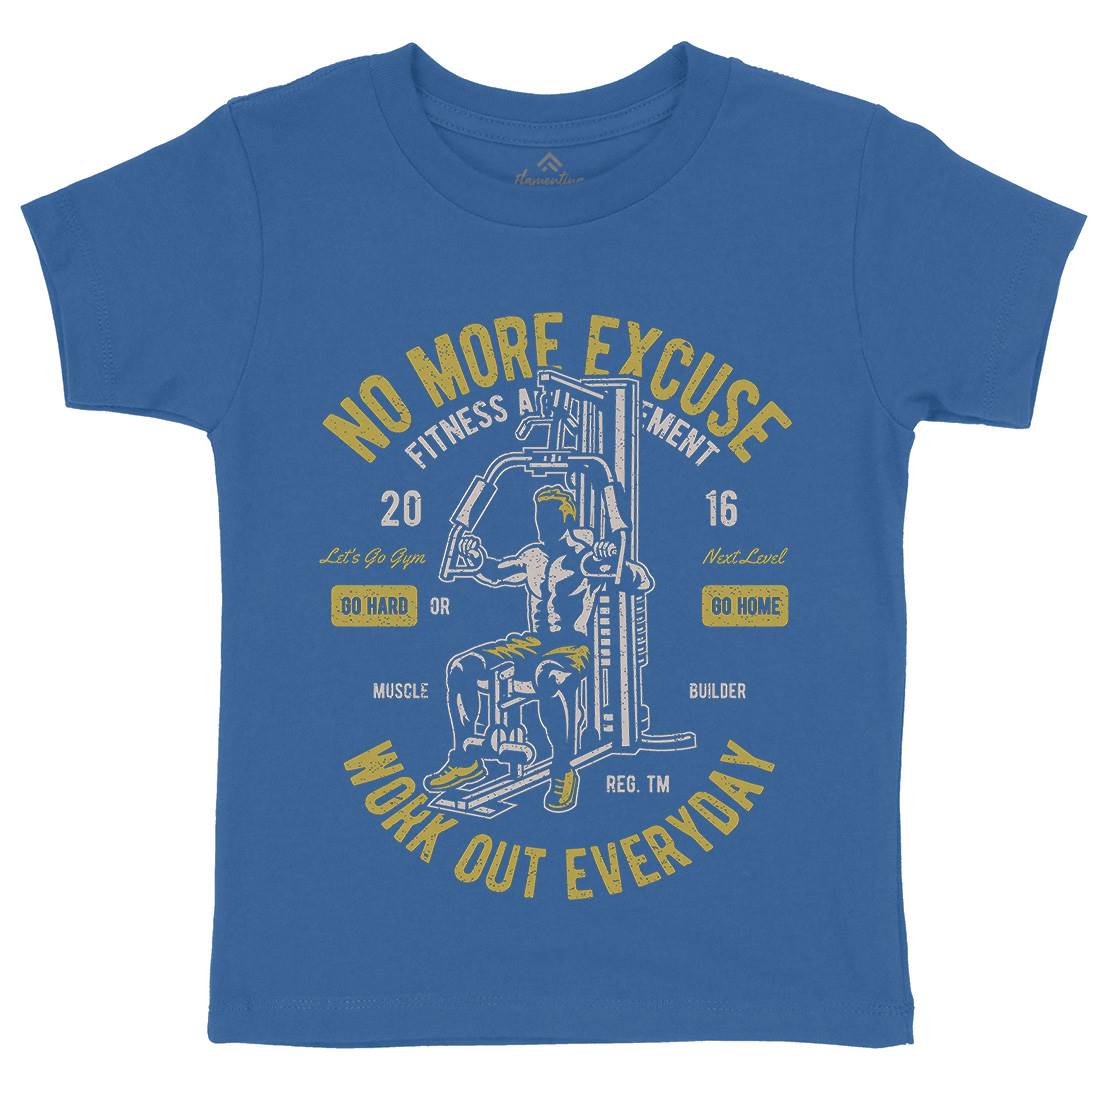 Work Out Everyday Kids Organic Crew Neck T-Shirt Gym A198